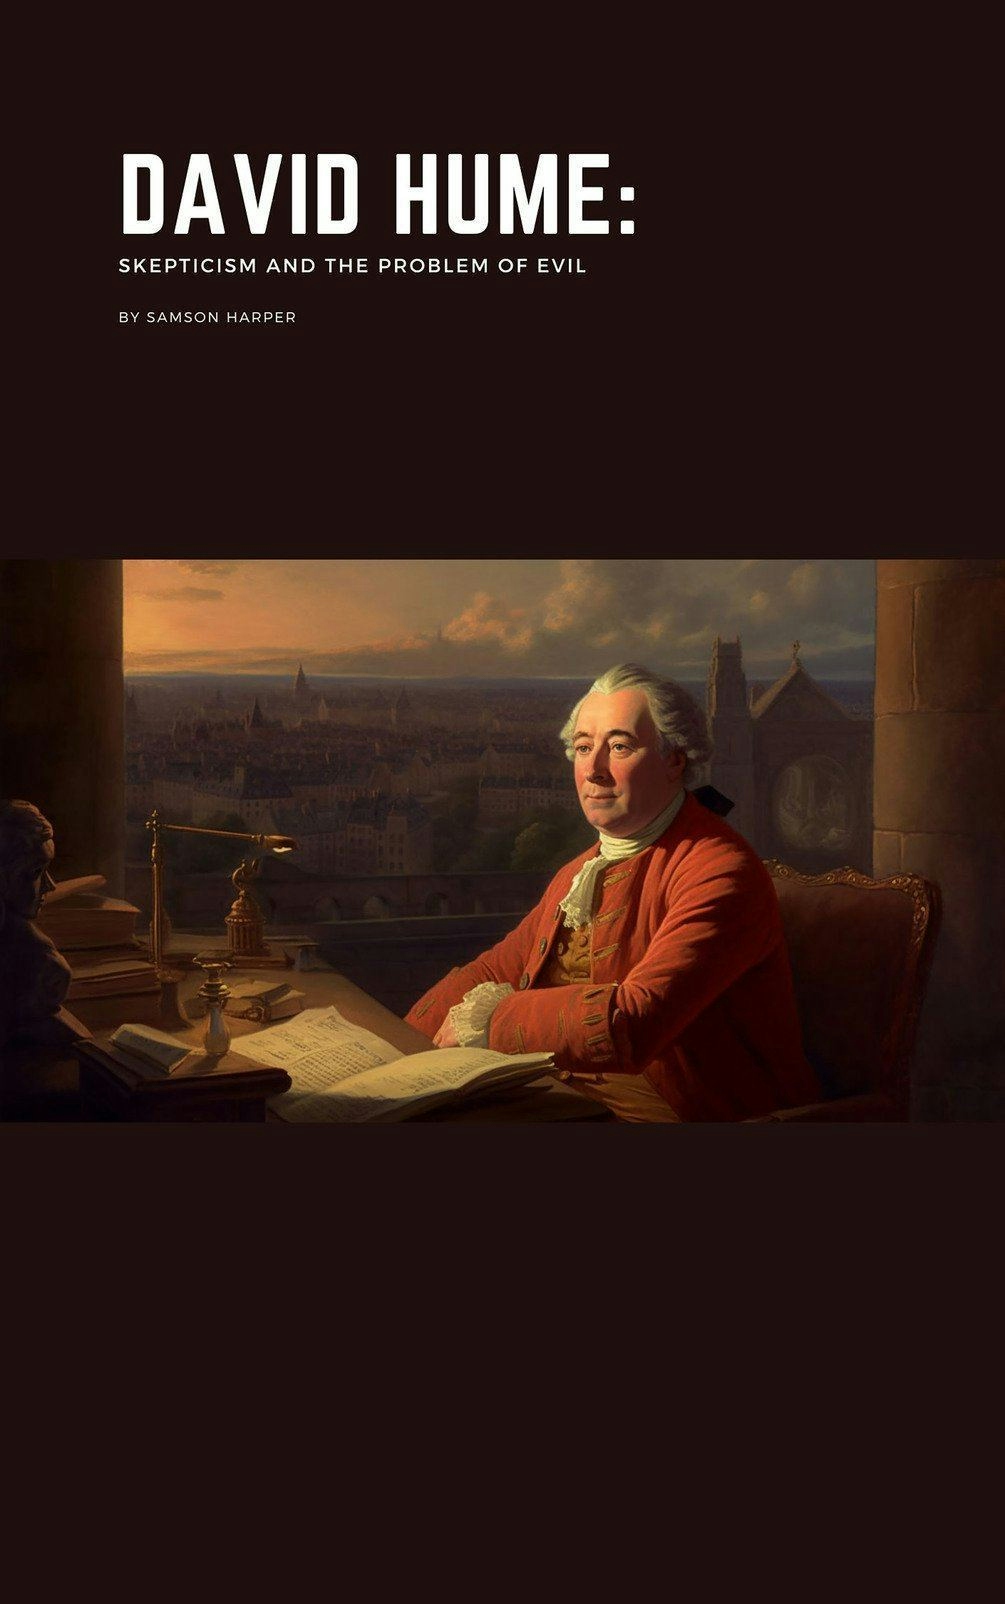 David Hume: Skepticism and the Problem of Evil